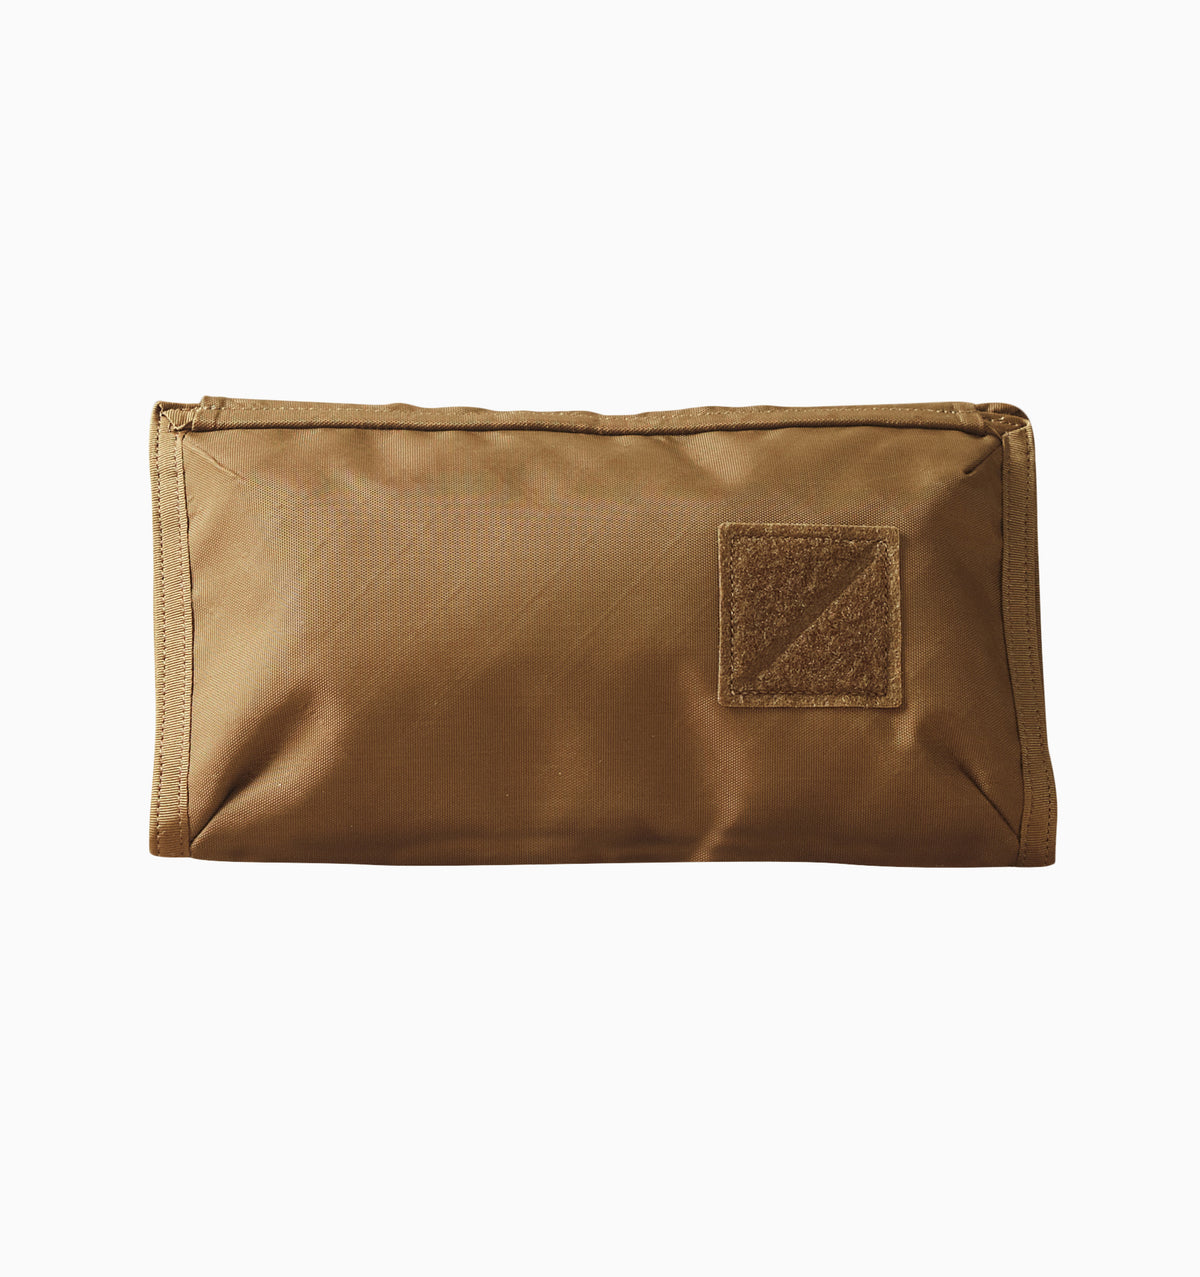 Evergoods Civic Access Pouch - EcoPak - 1L - Coyote Brown